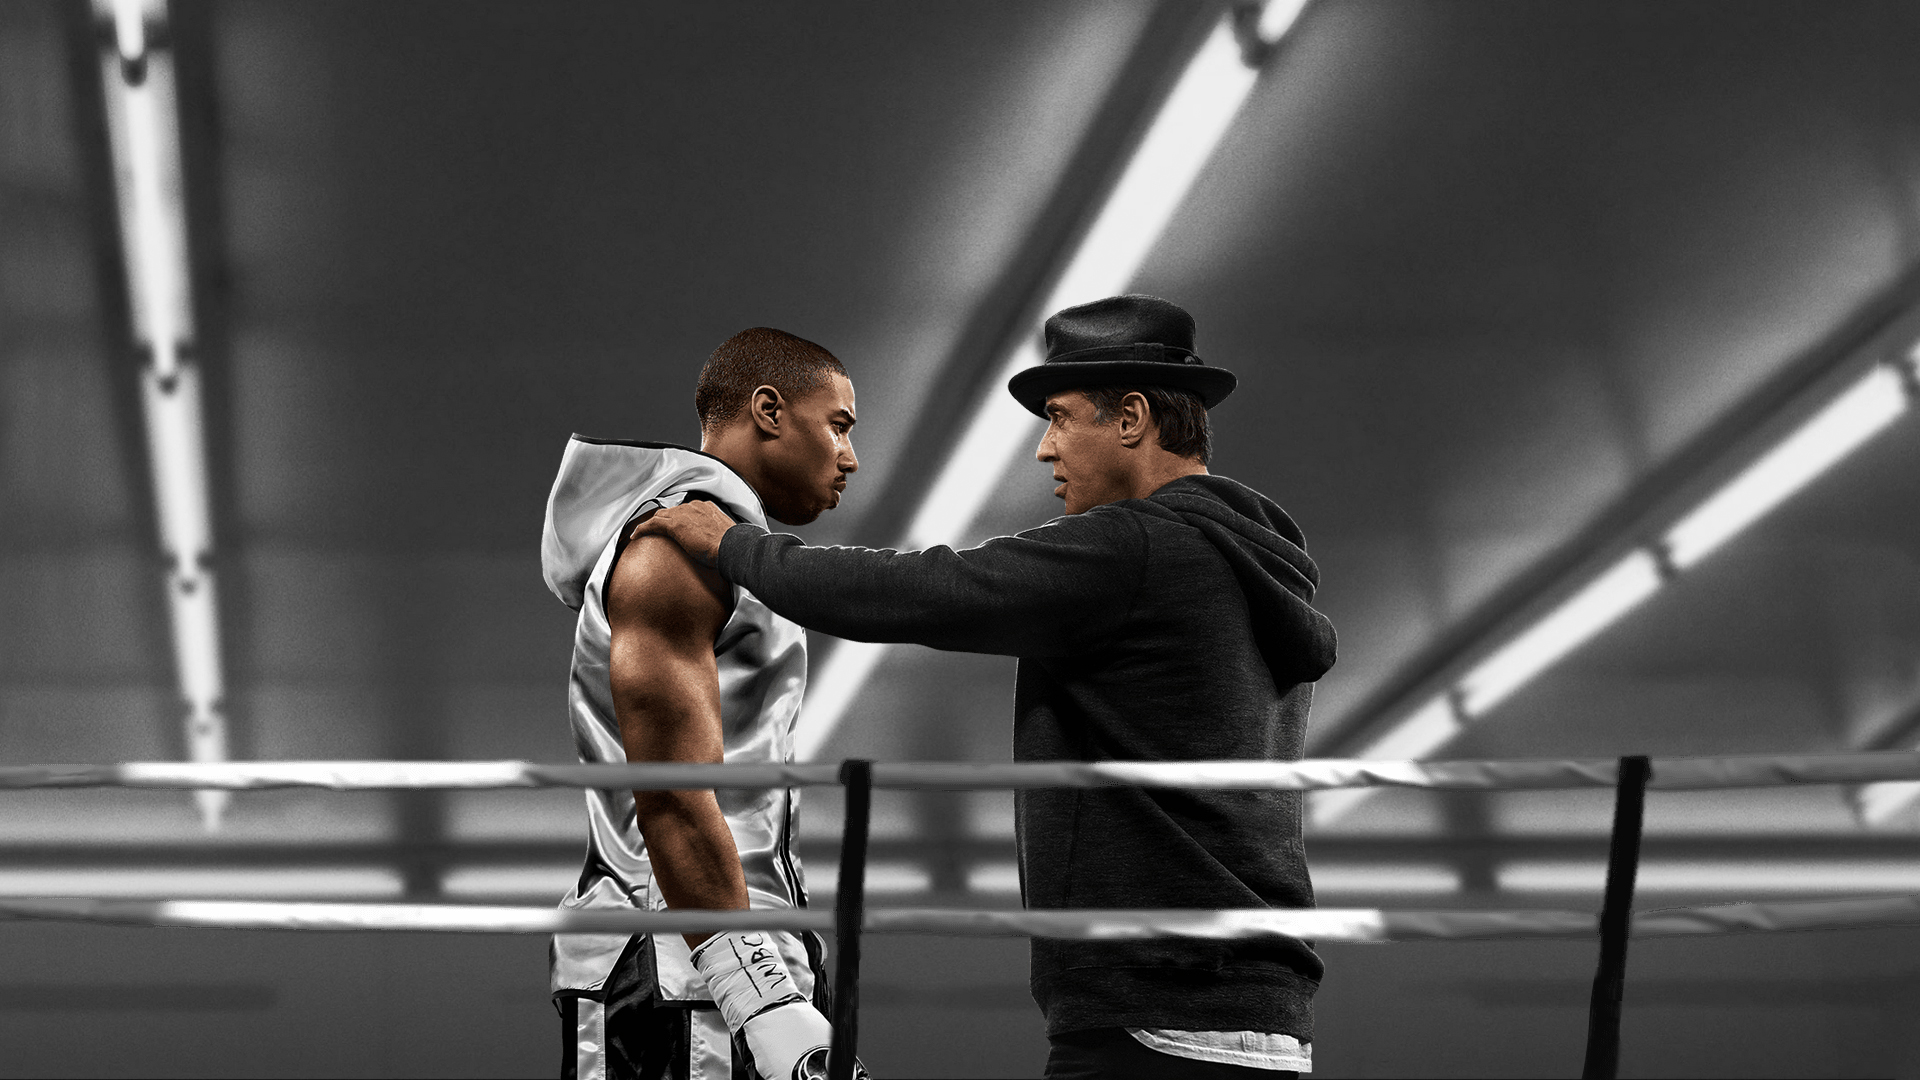 1080p Creed Hd Images